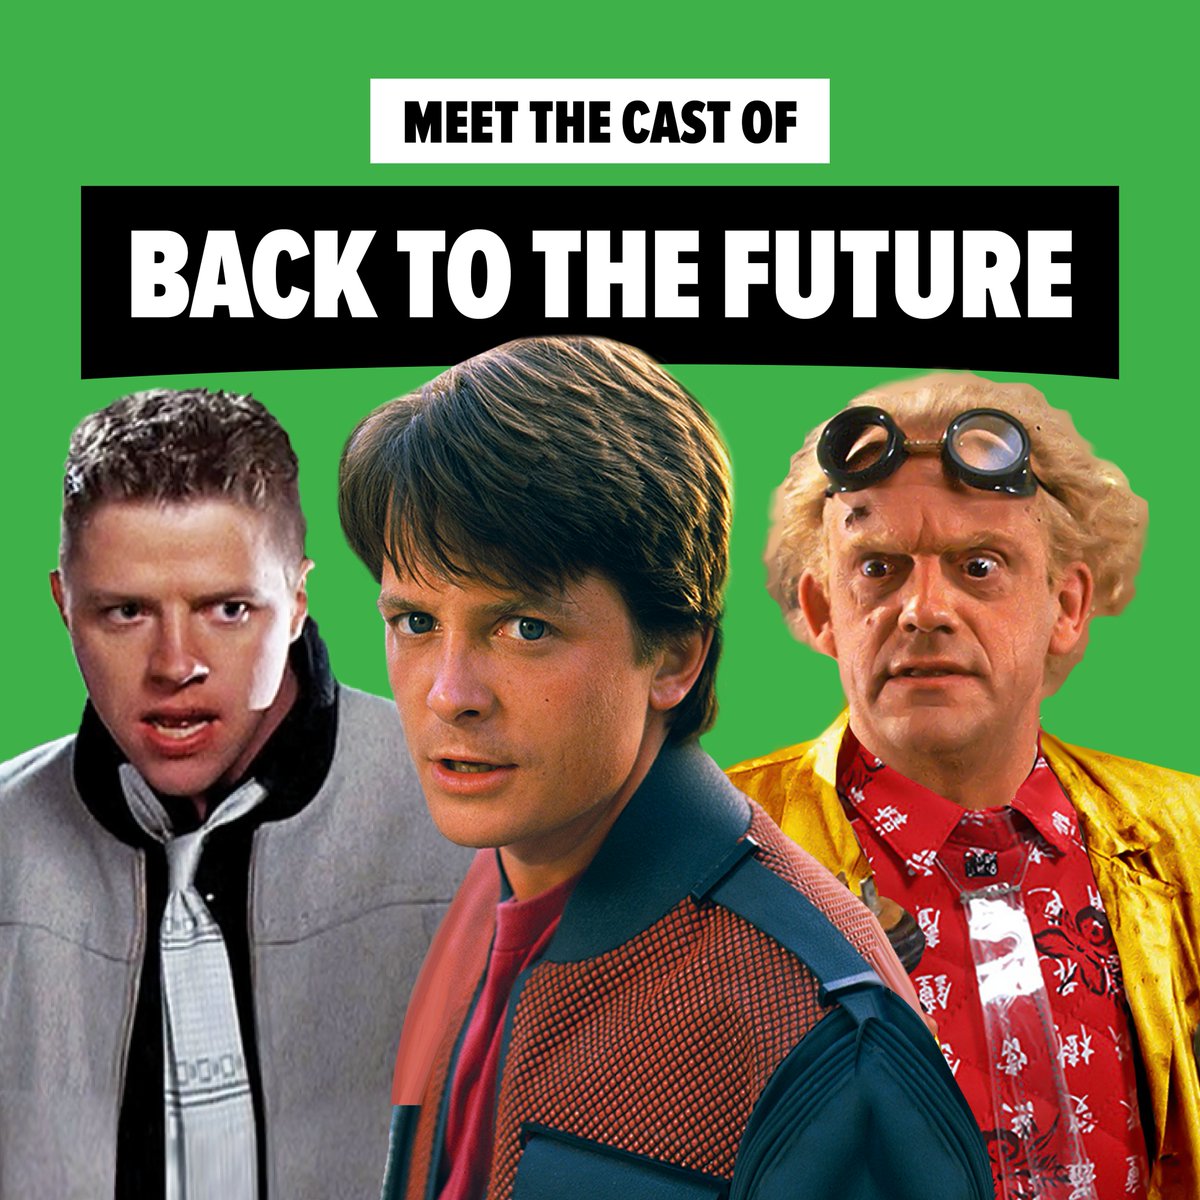 Meet Michael J. Fox, Christopher Lloyd and Tom Wilson this weekend at Fan Expo Philadelphia! June 2-4, 2023
BacktotheFuture.events